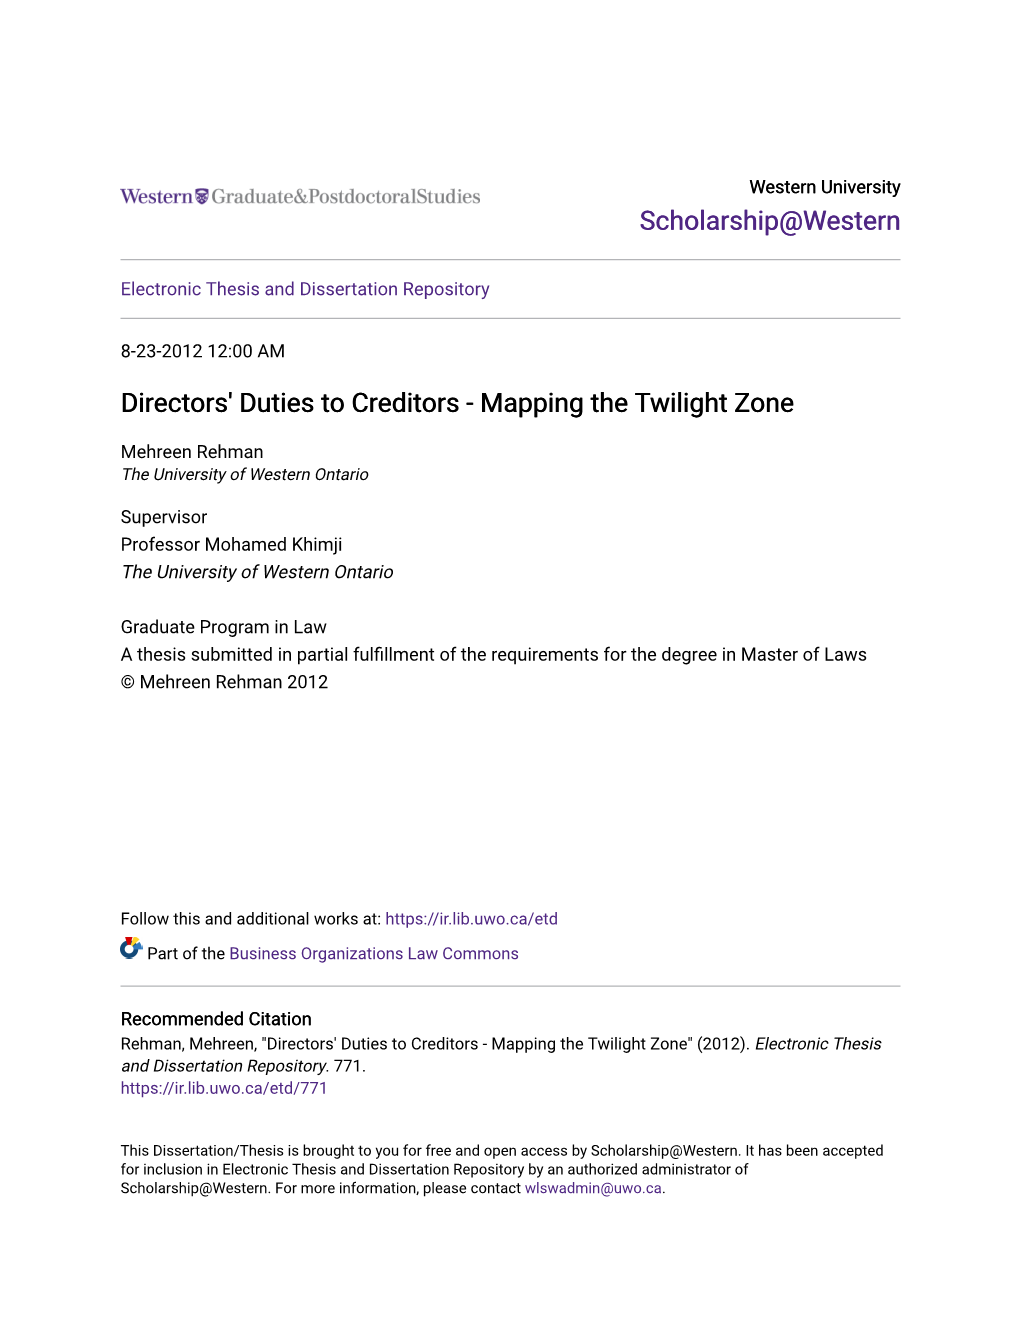 Directors' Duties to Creditors - Mapping the Twilight Zone